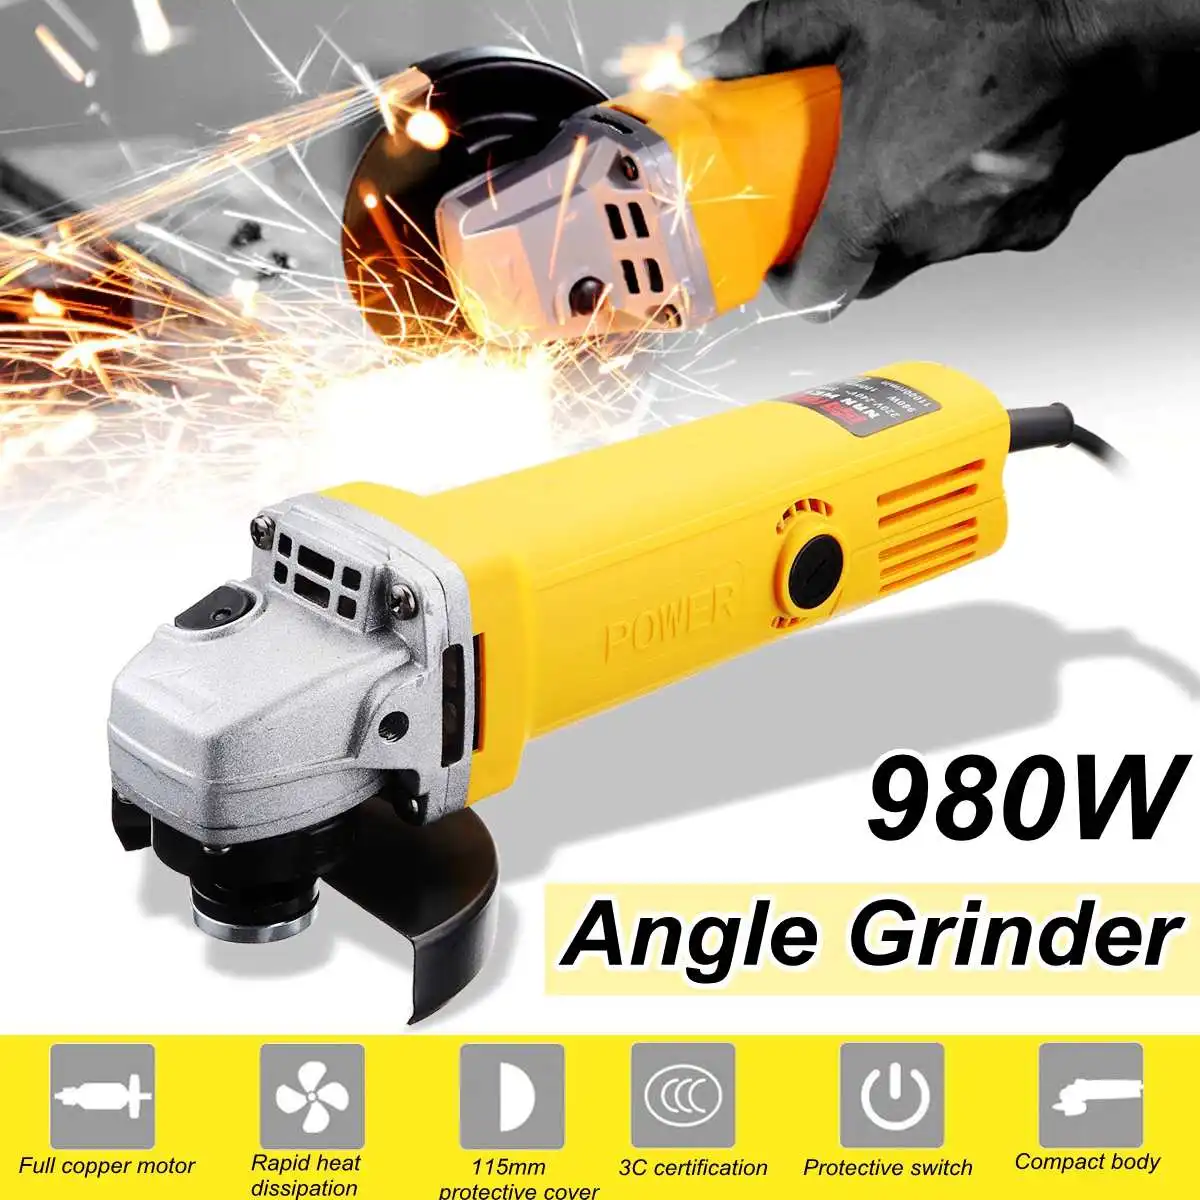 

220V/50Hz 980W 11000r/min Angle Grinder Electric Angle Grinding Cutting Power Tools 100mm Diameter